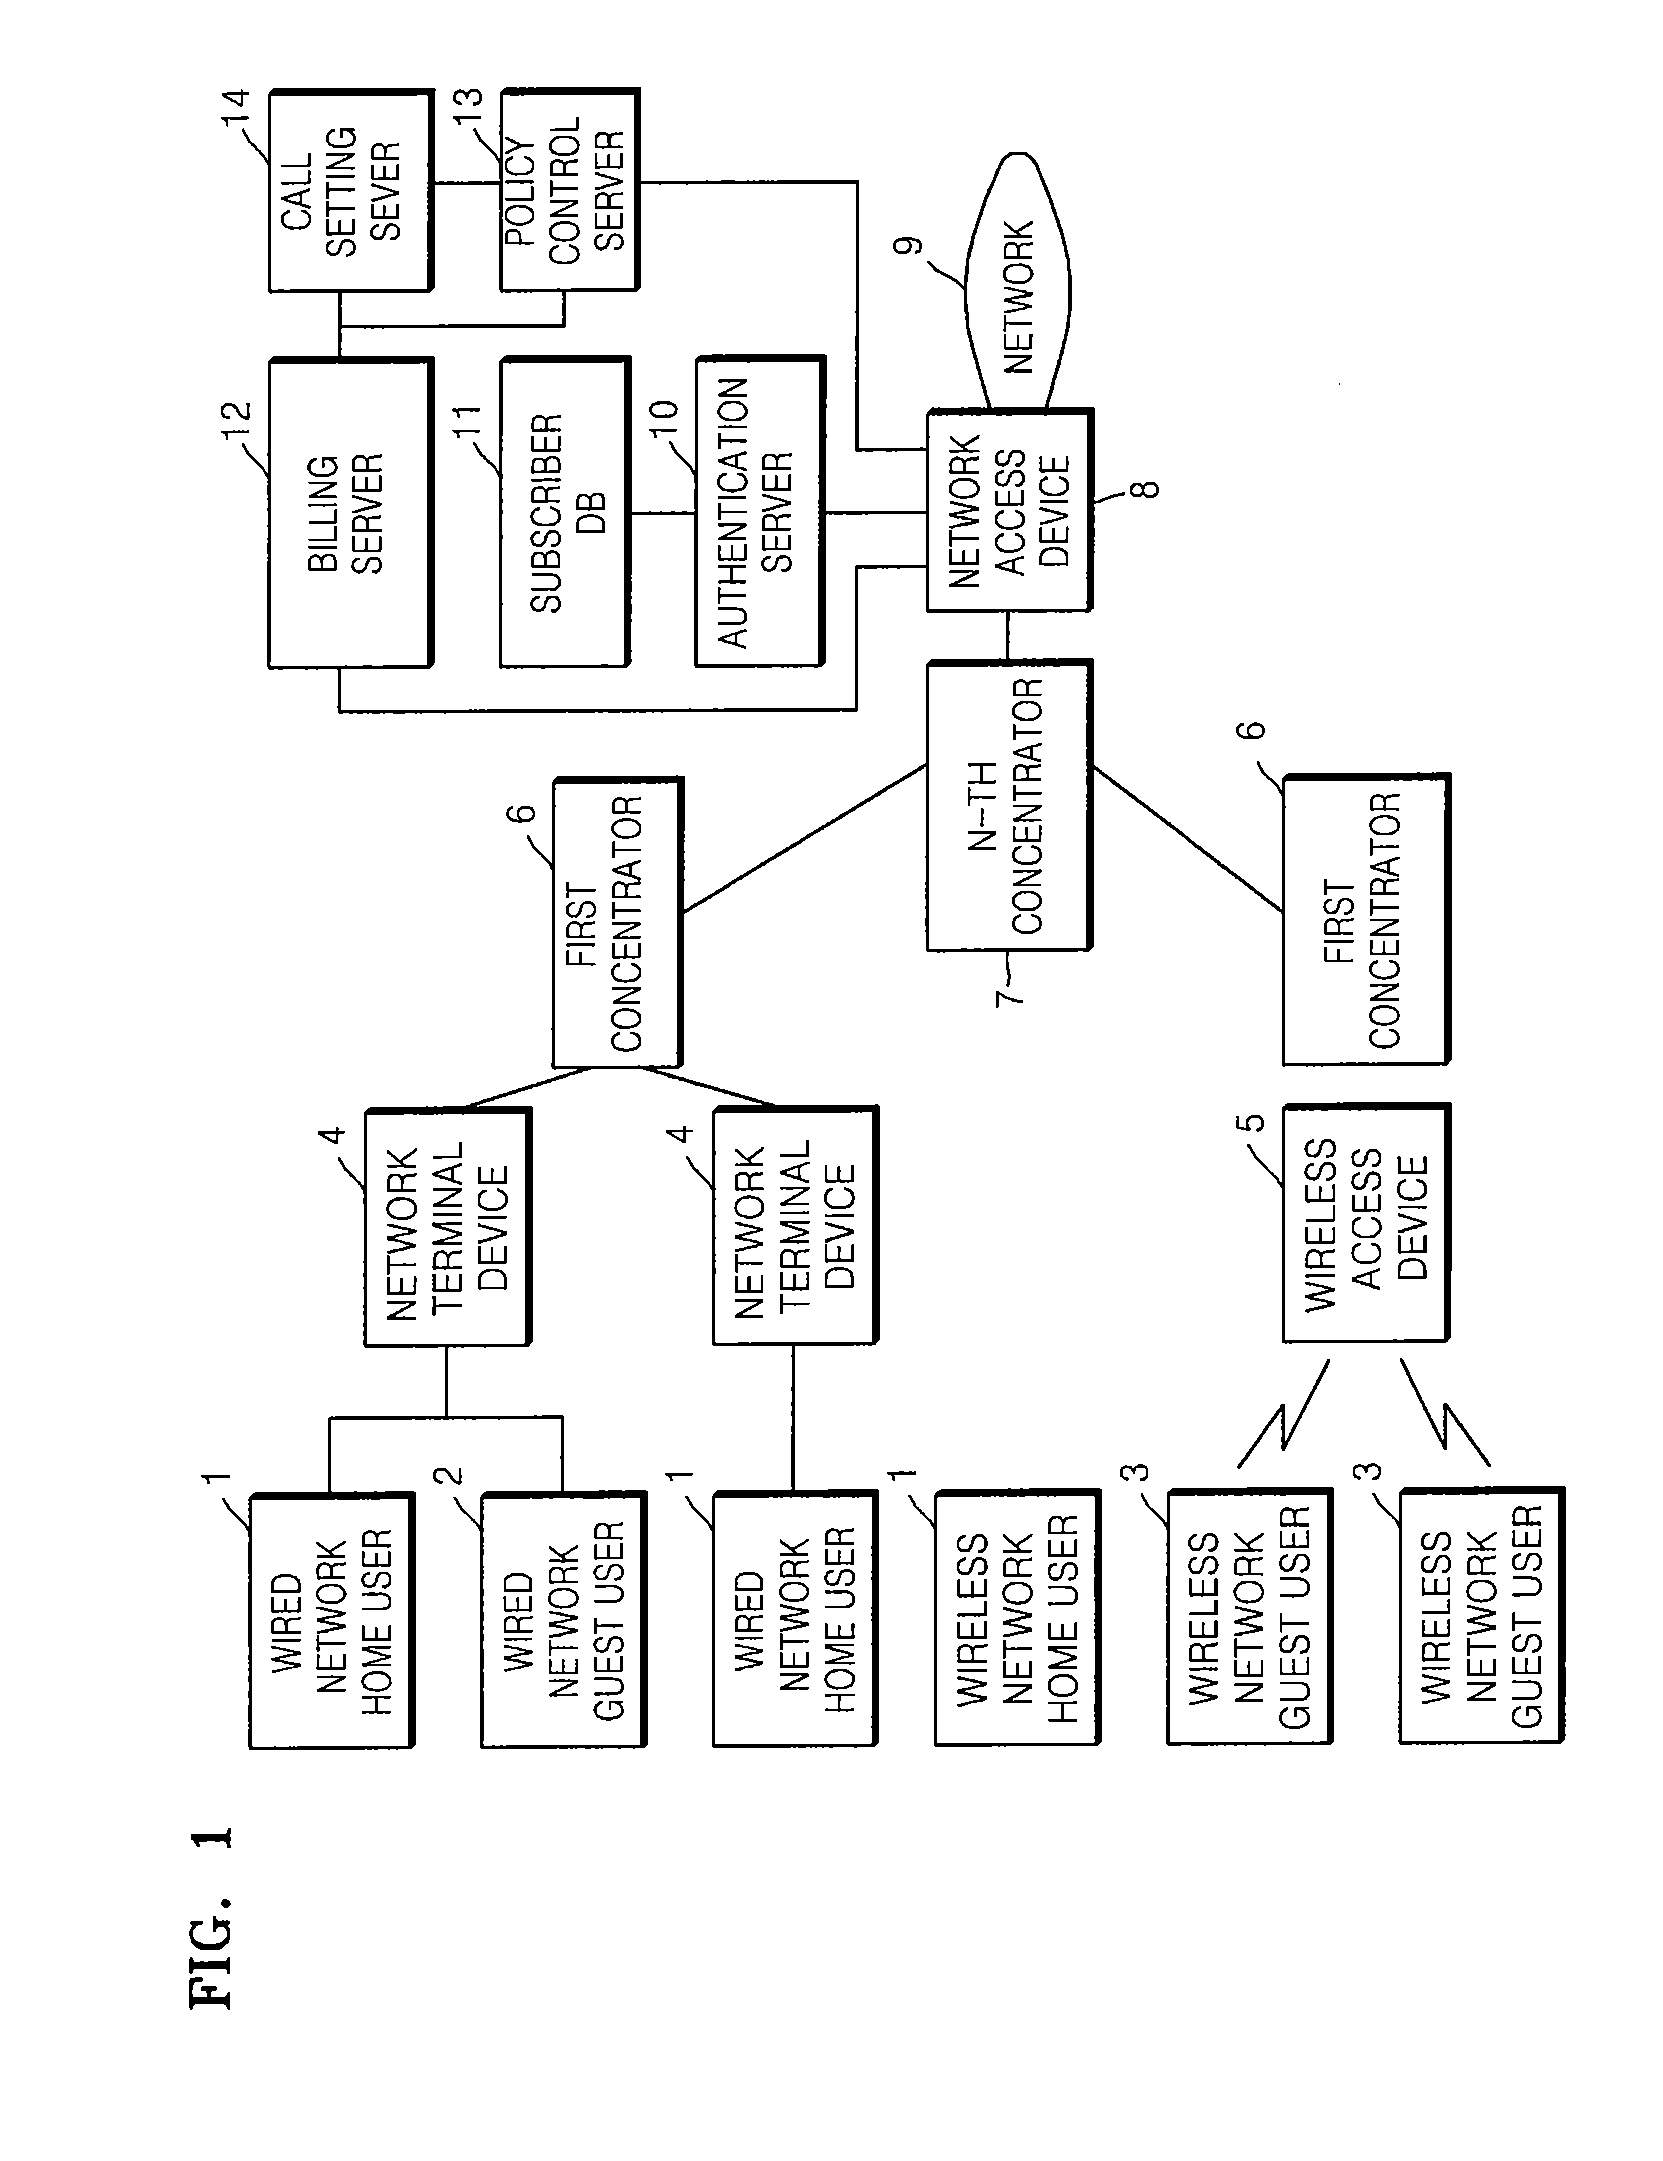 Method for providing network communication service with constant quality regardless of being in wired or wireless network environment